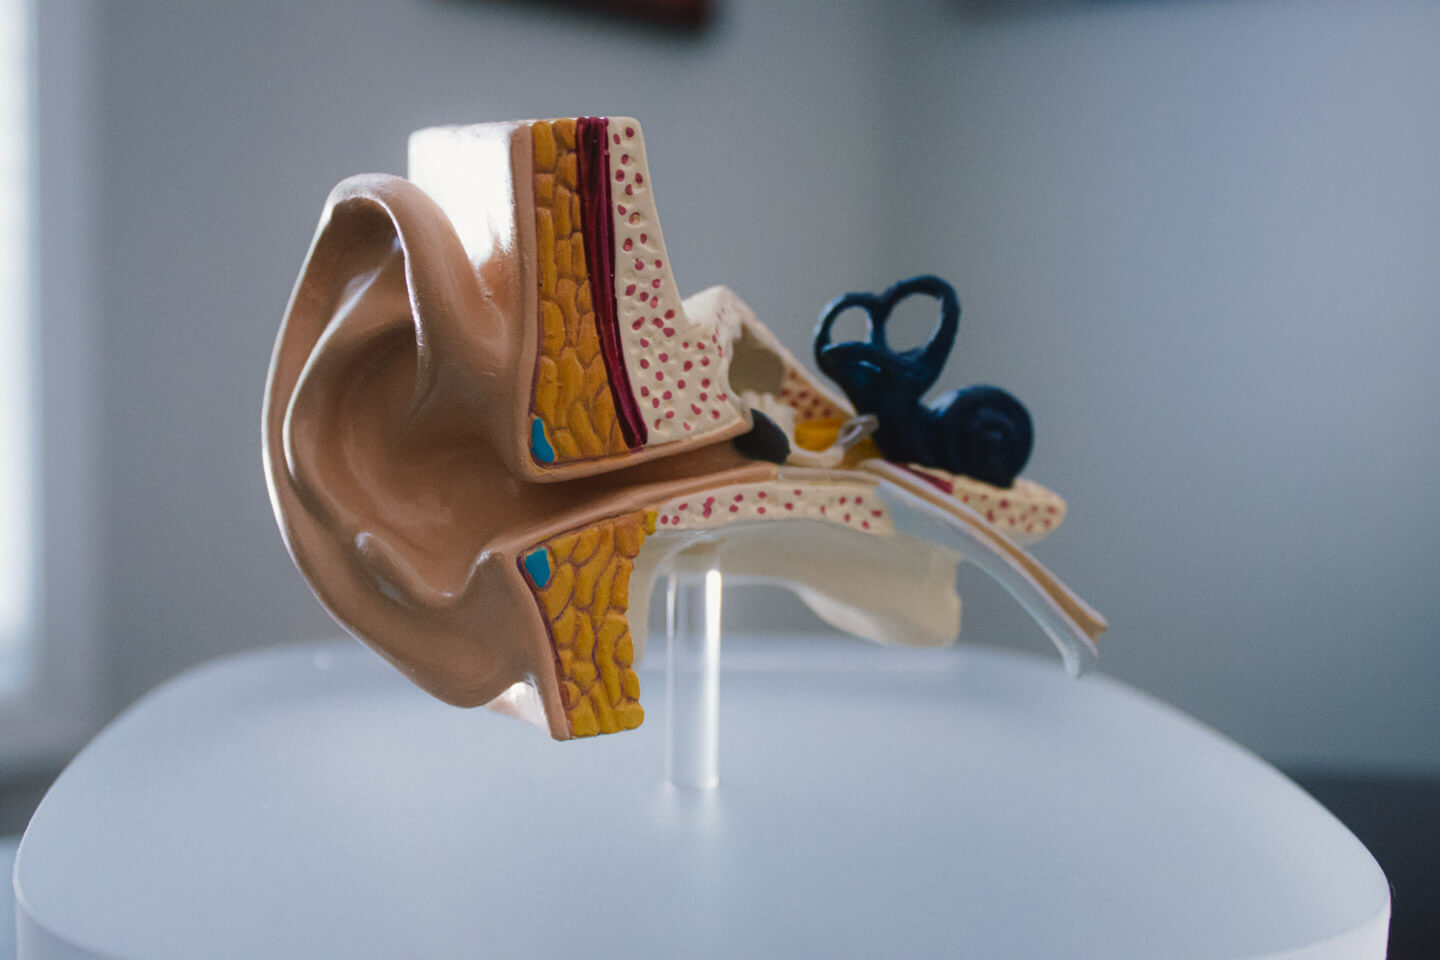 Model of a ear that shows a detailed image of the inner and outer ear